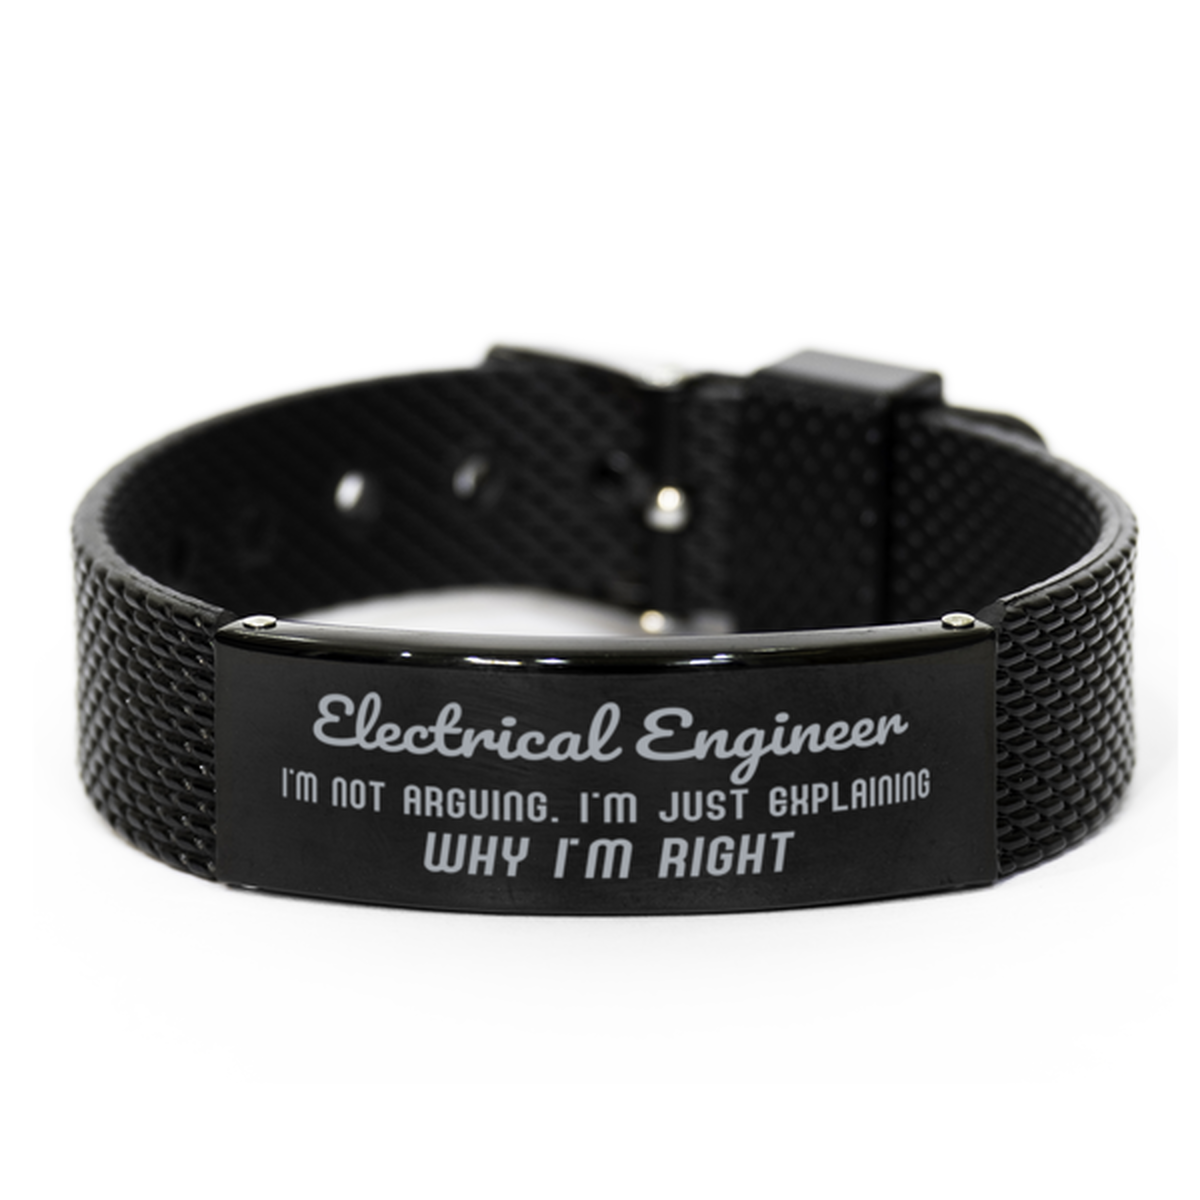 Electrical Engineer I'm not Arguing. I'm Just Explaining Why I'm RIGHT Black Shark Mesh Bracelet, Funny Saying Quote Electrical Engineer Gifts For Electrical Engineer Graduation Birthday Christmas Gifts for Men Women Coworker